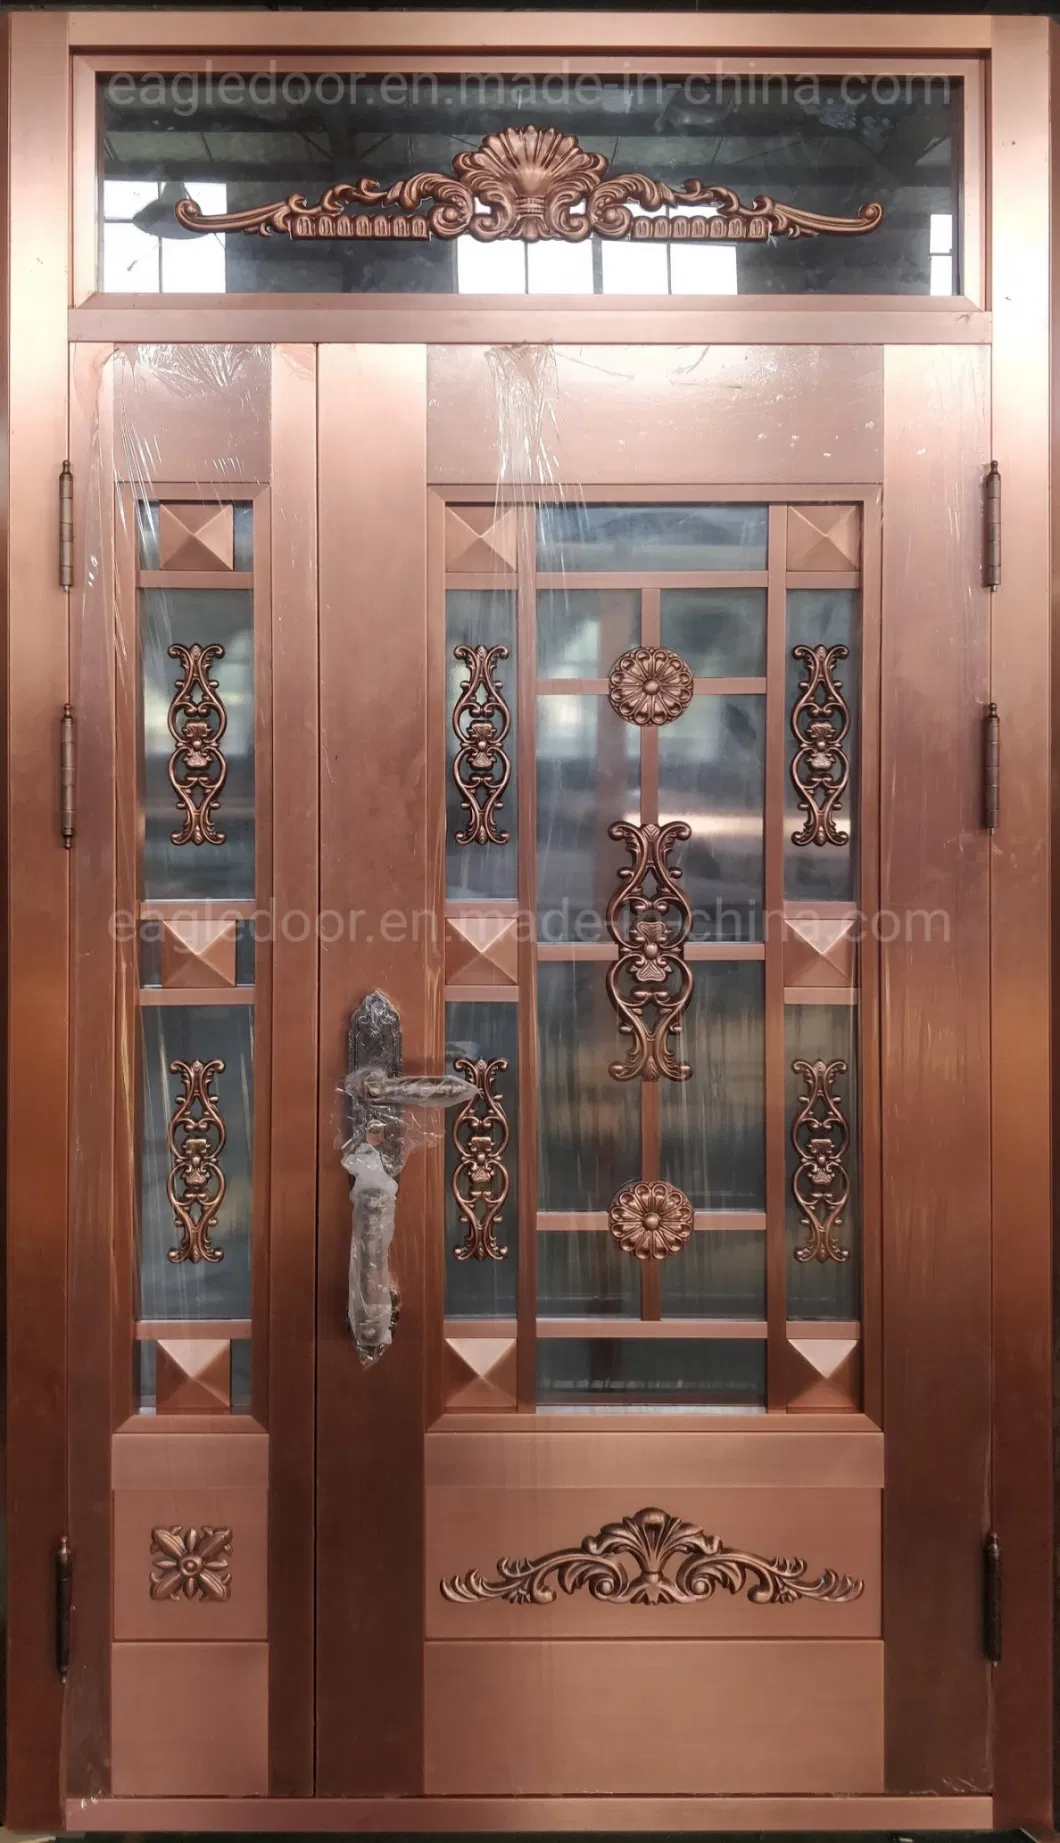 USA Swing Open Style and Exterior Position Copper Entry Doors Main Entrance House Door Design